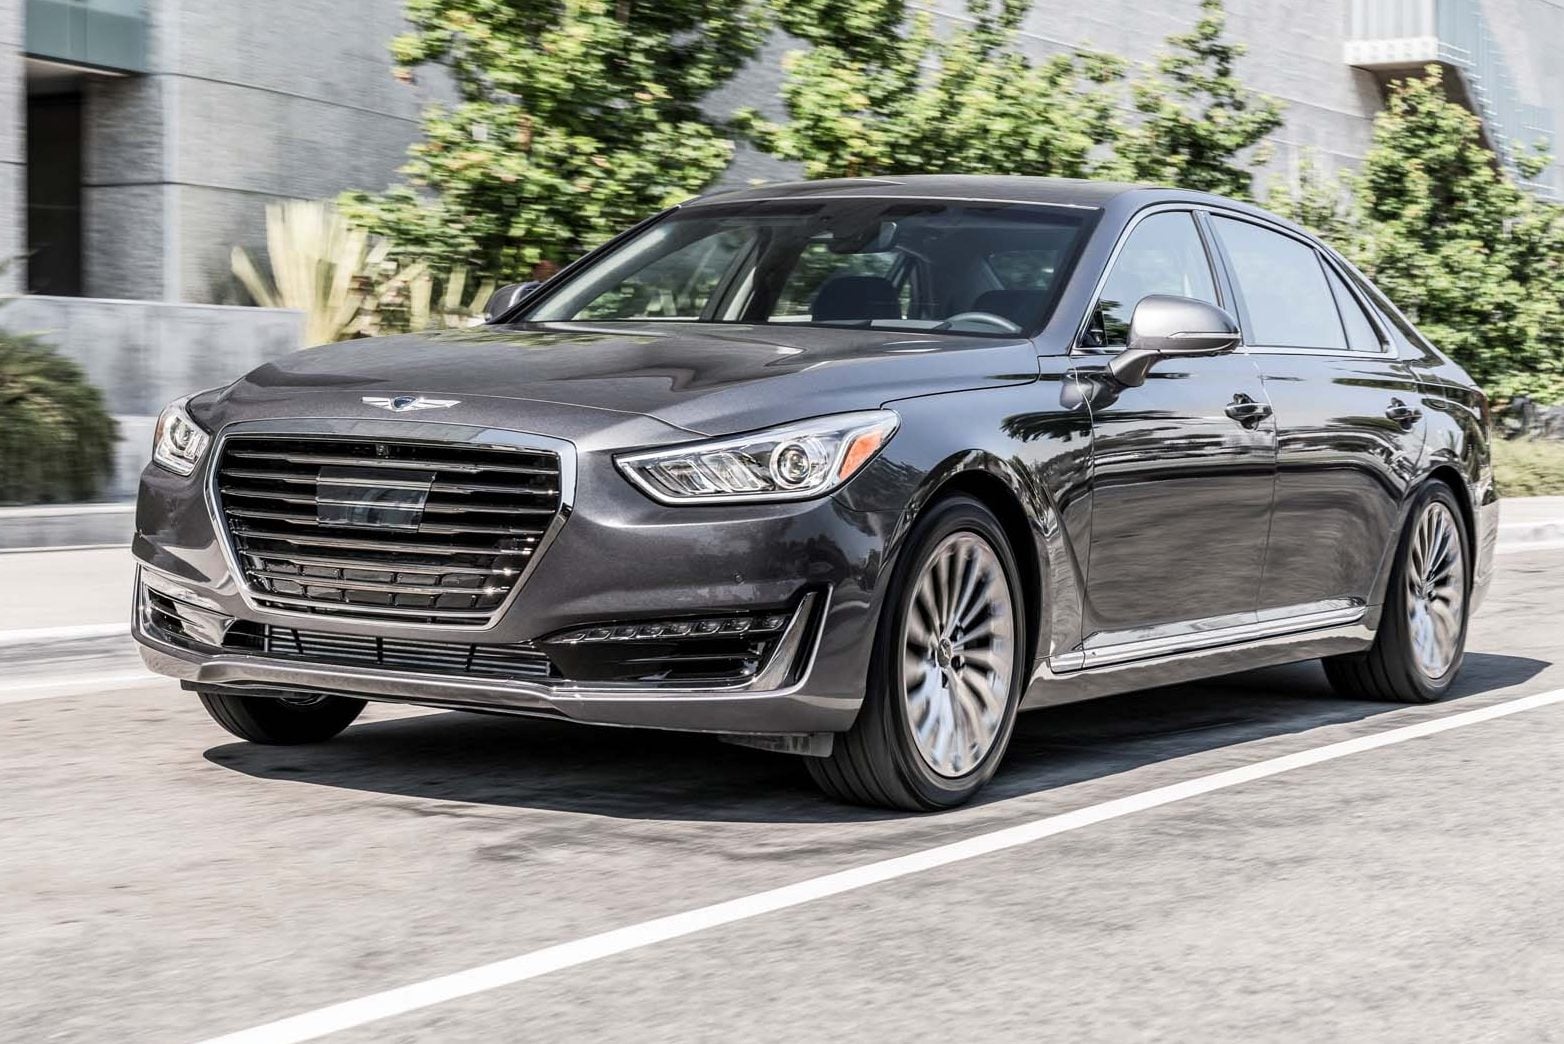 2017 Genesis G90 Starting at $69,050, Aims at Entry/Mid-Range Luxury Crowd